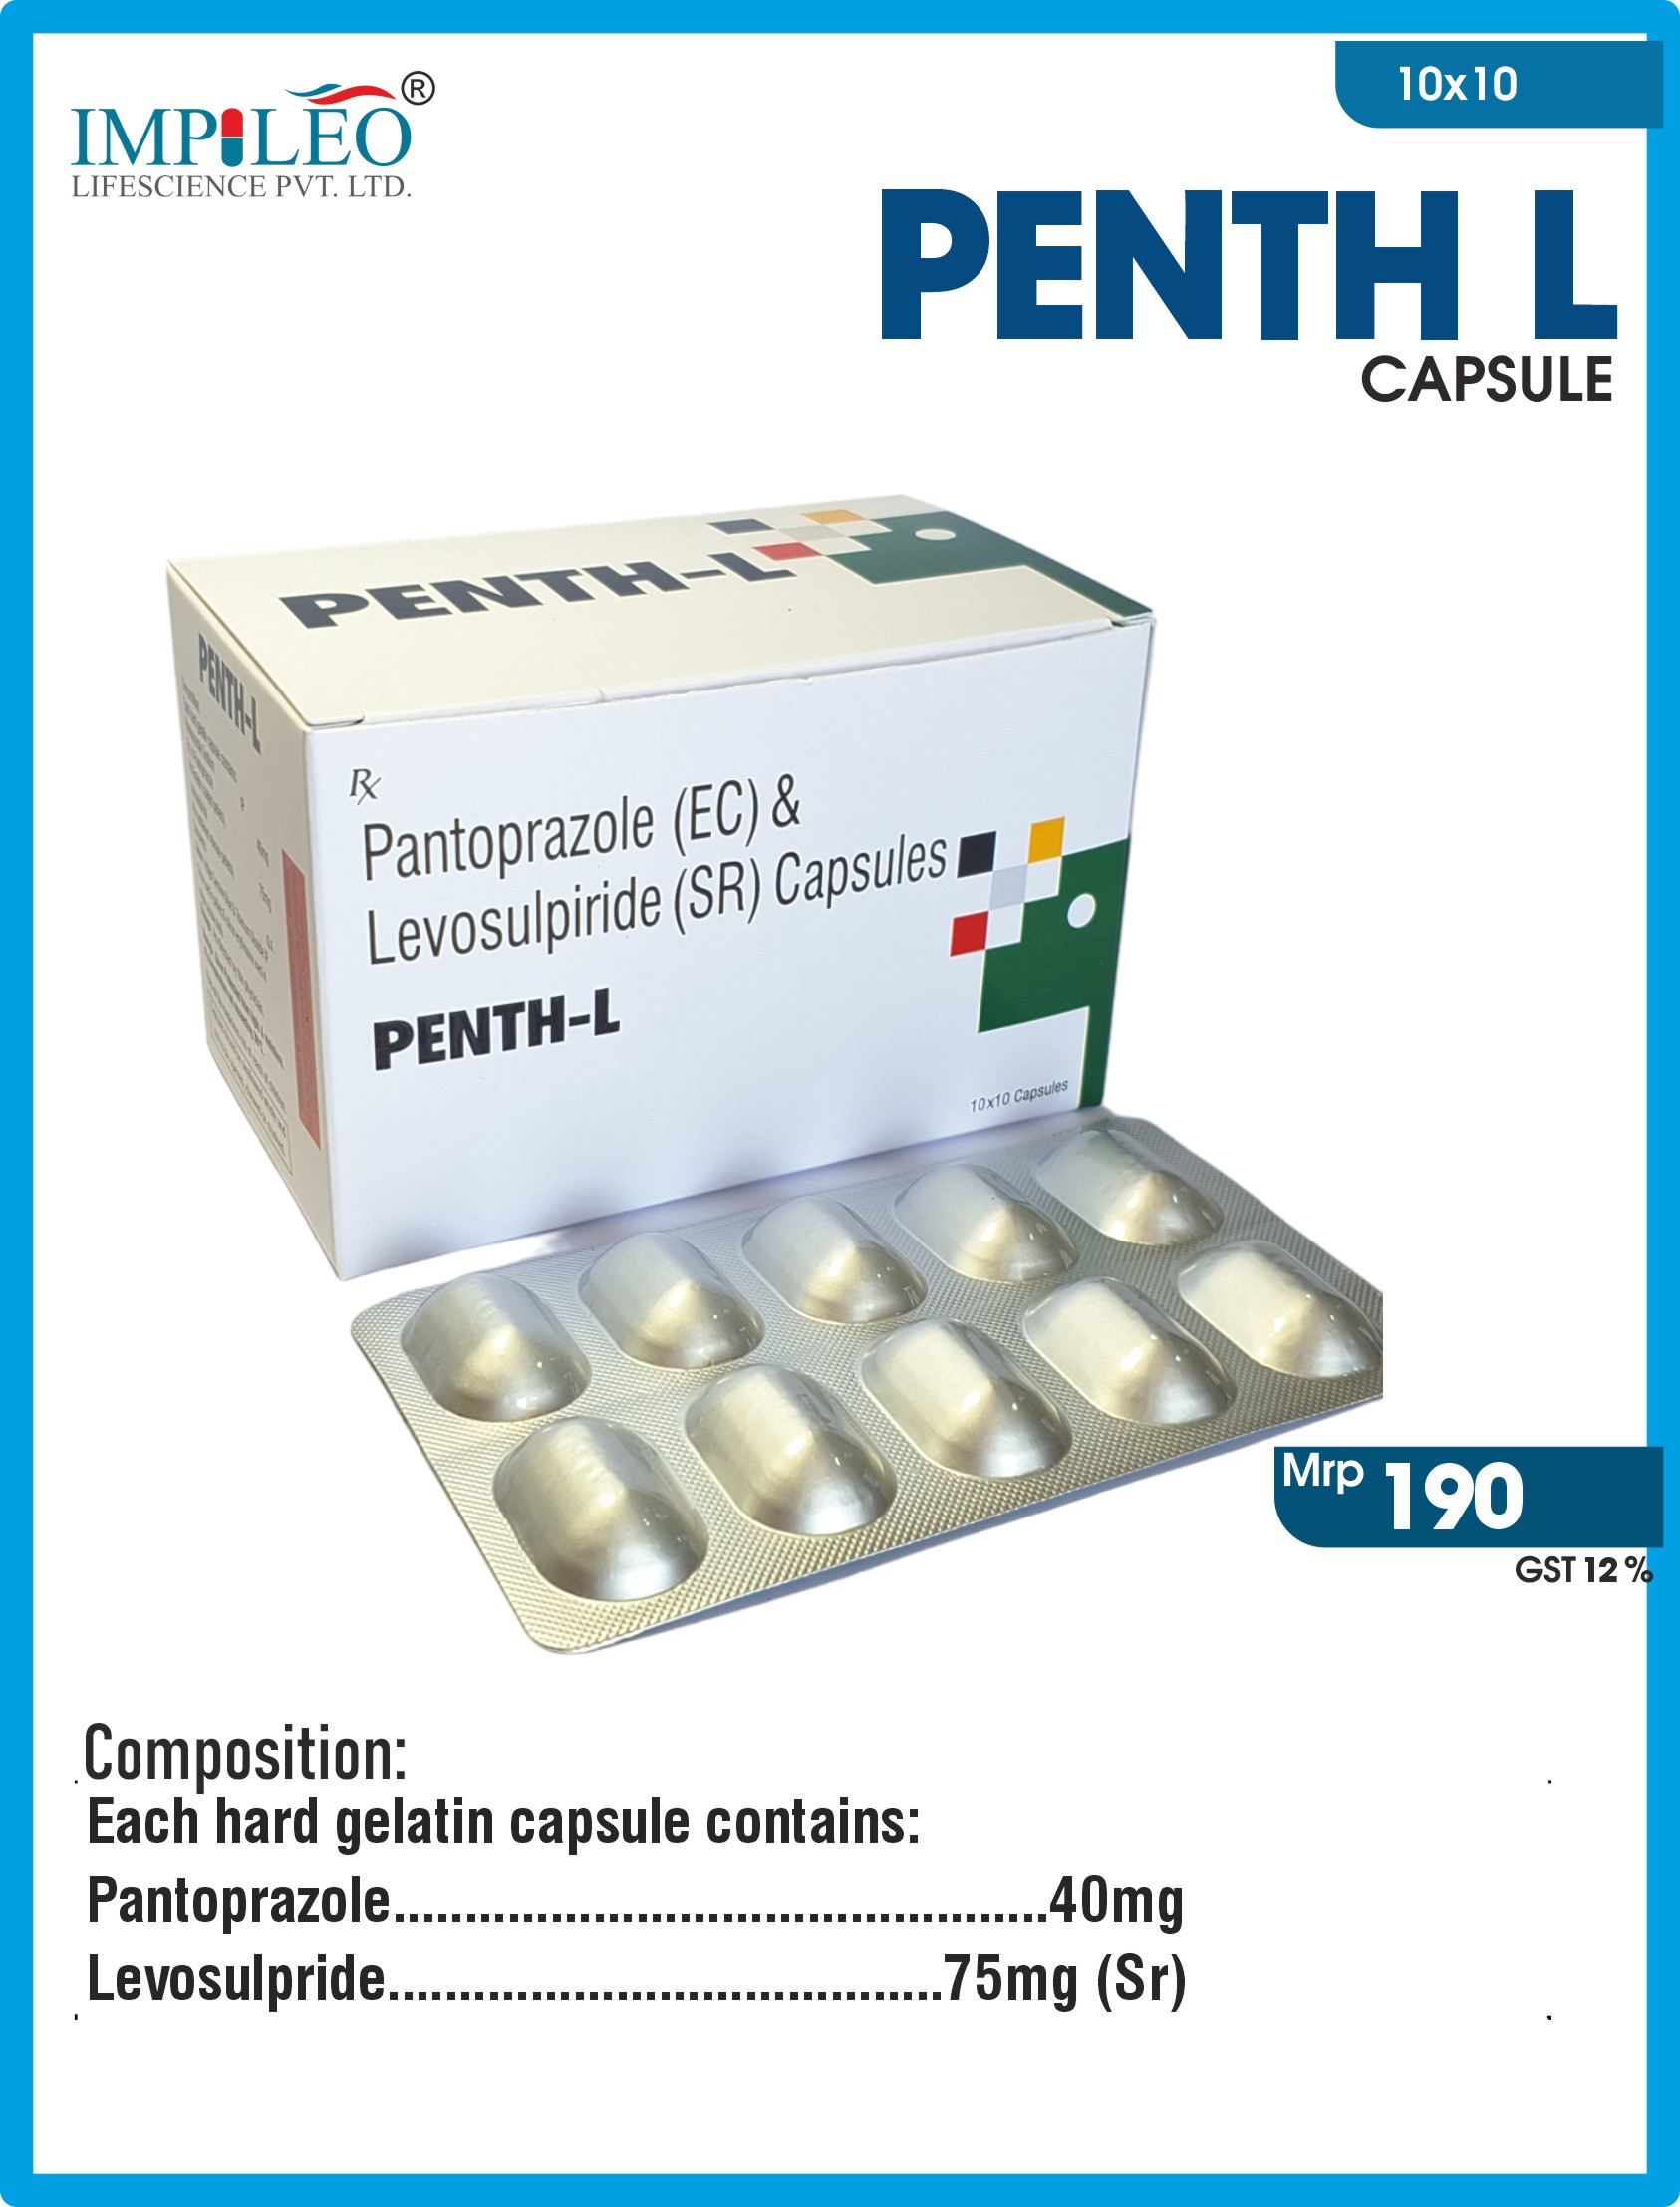 Streamline Production: Third Party Manufacturing in Baddi for PENTH L Capsules